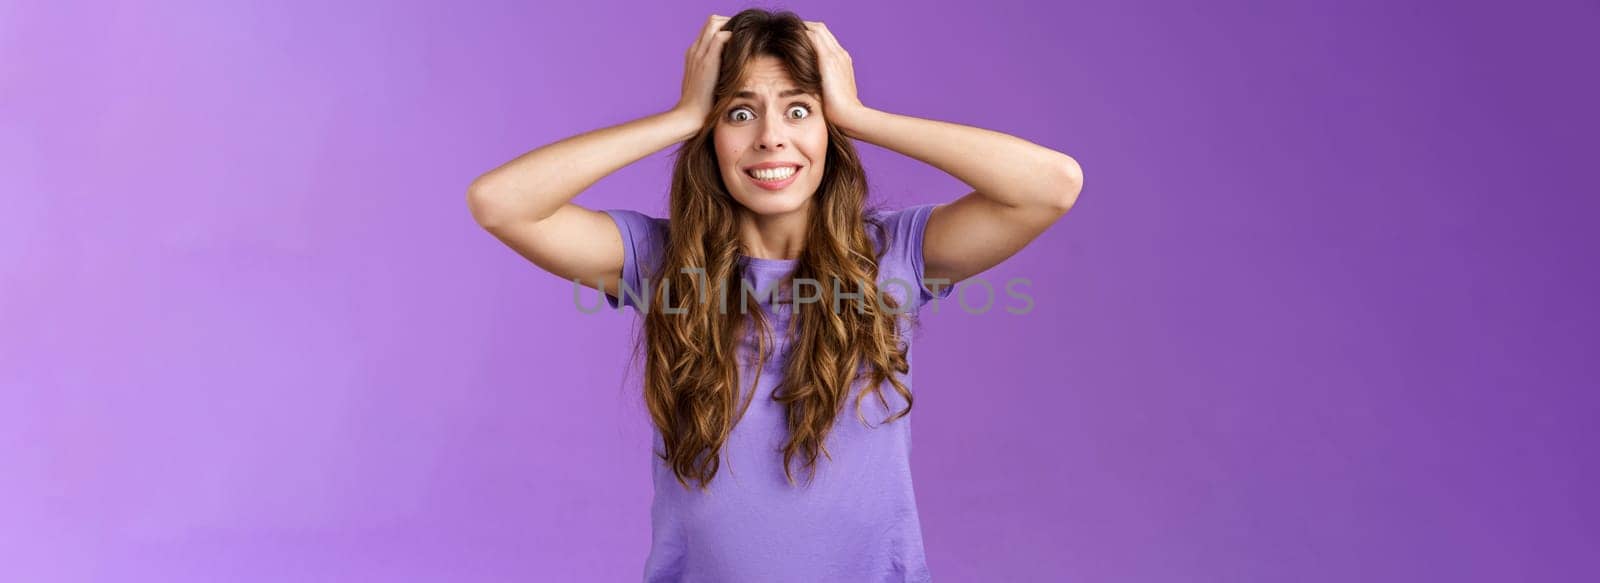 Girl feel panic troublesome perplexed situation clench teeth intense stare camera grab head distressed upset going insane crazy pissed popping eyes feel rage disappointment stand purple background. Lifestyle.